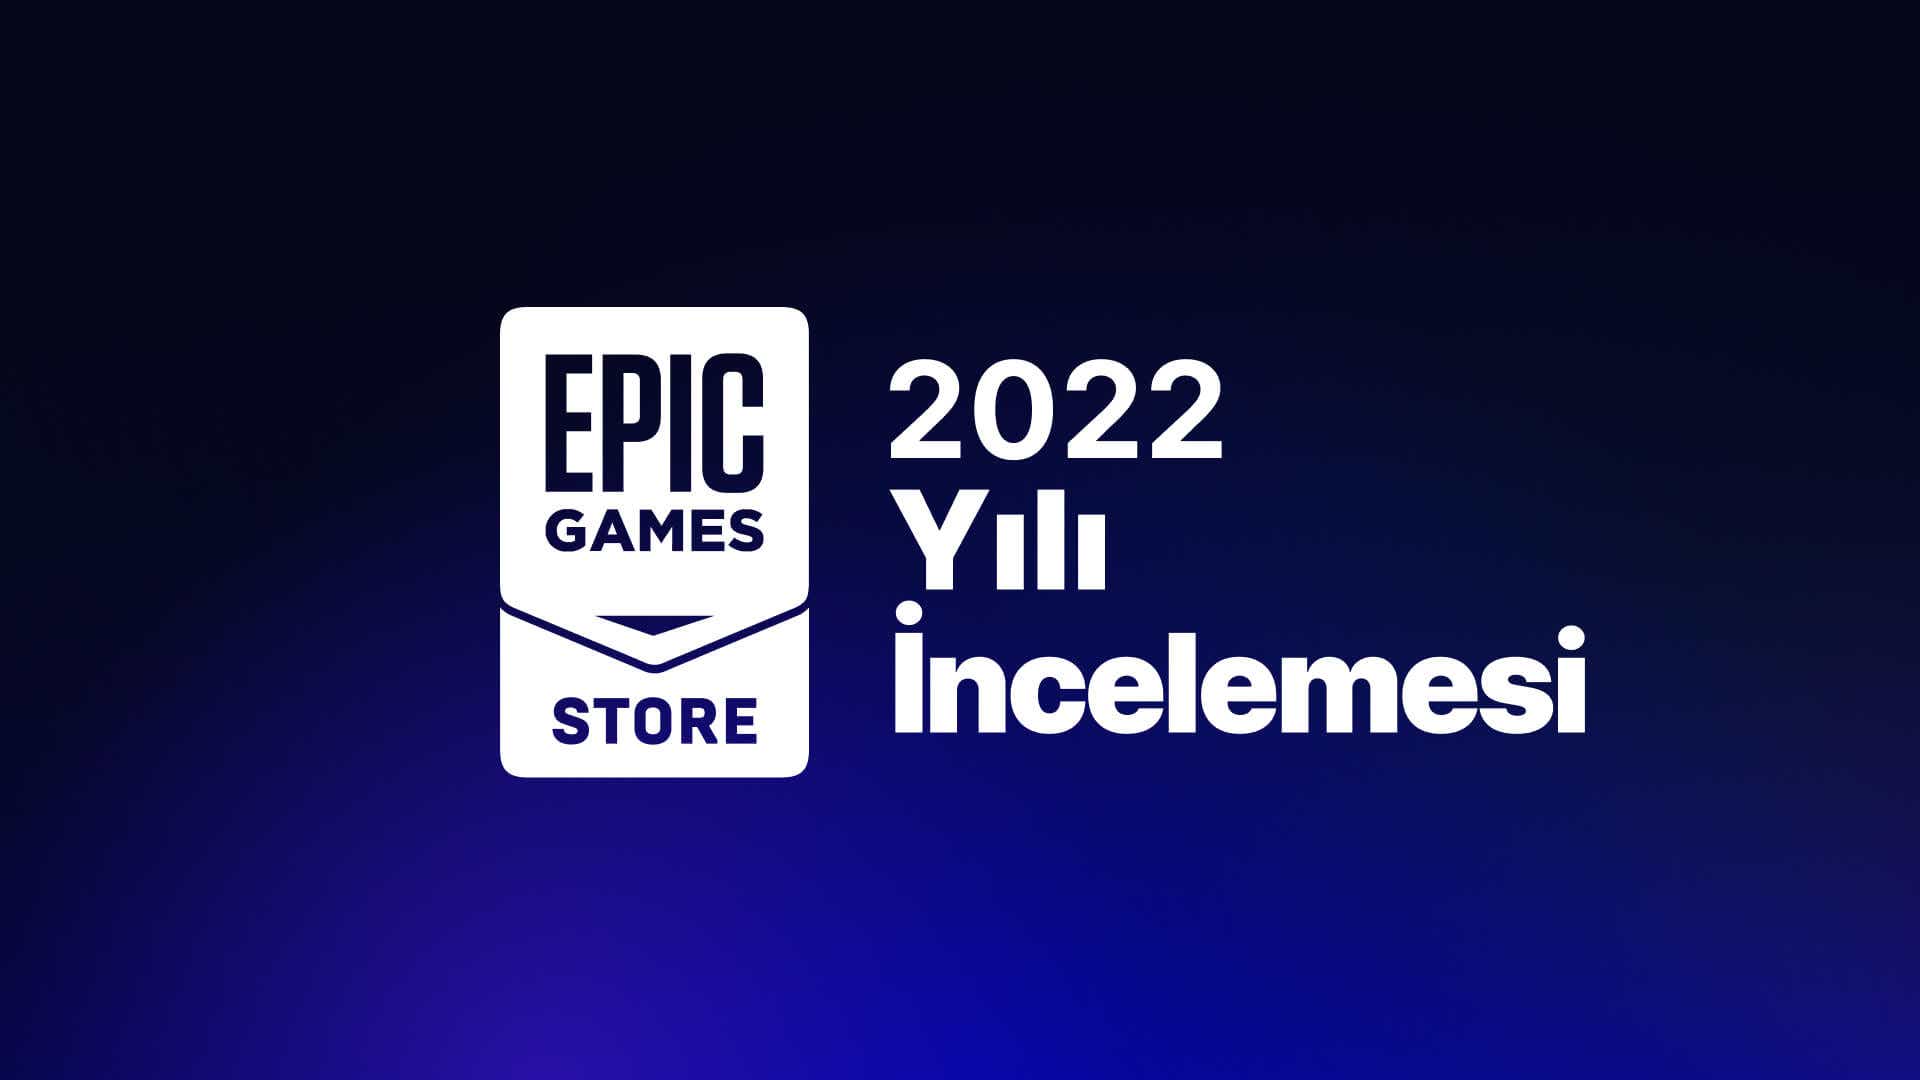 epic games store active users